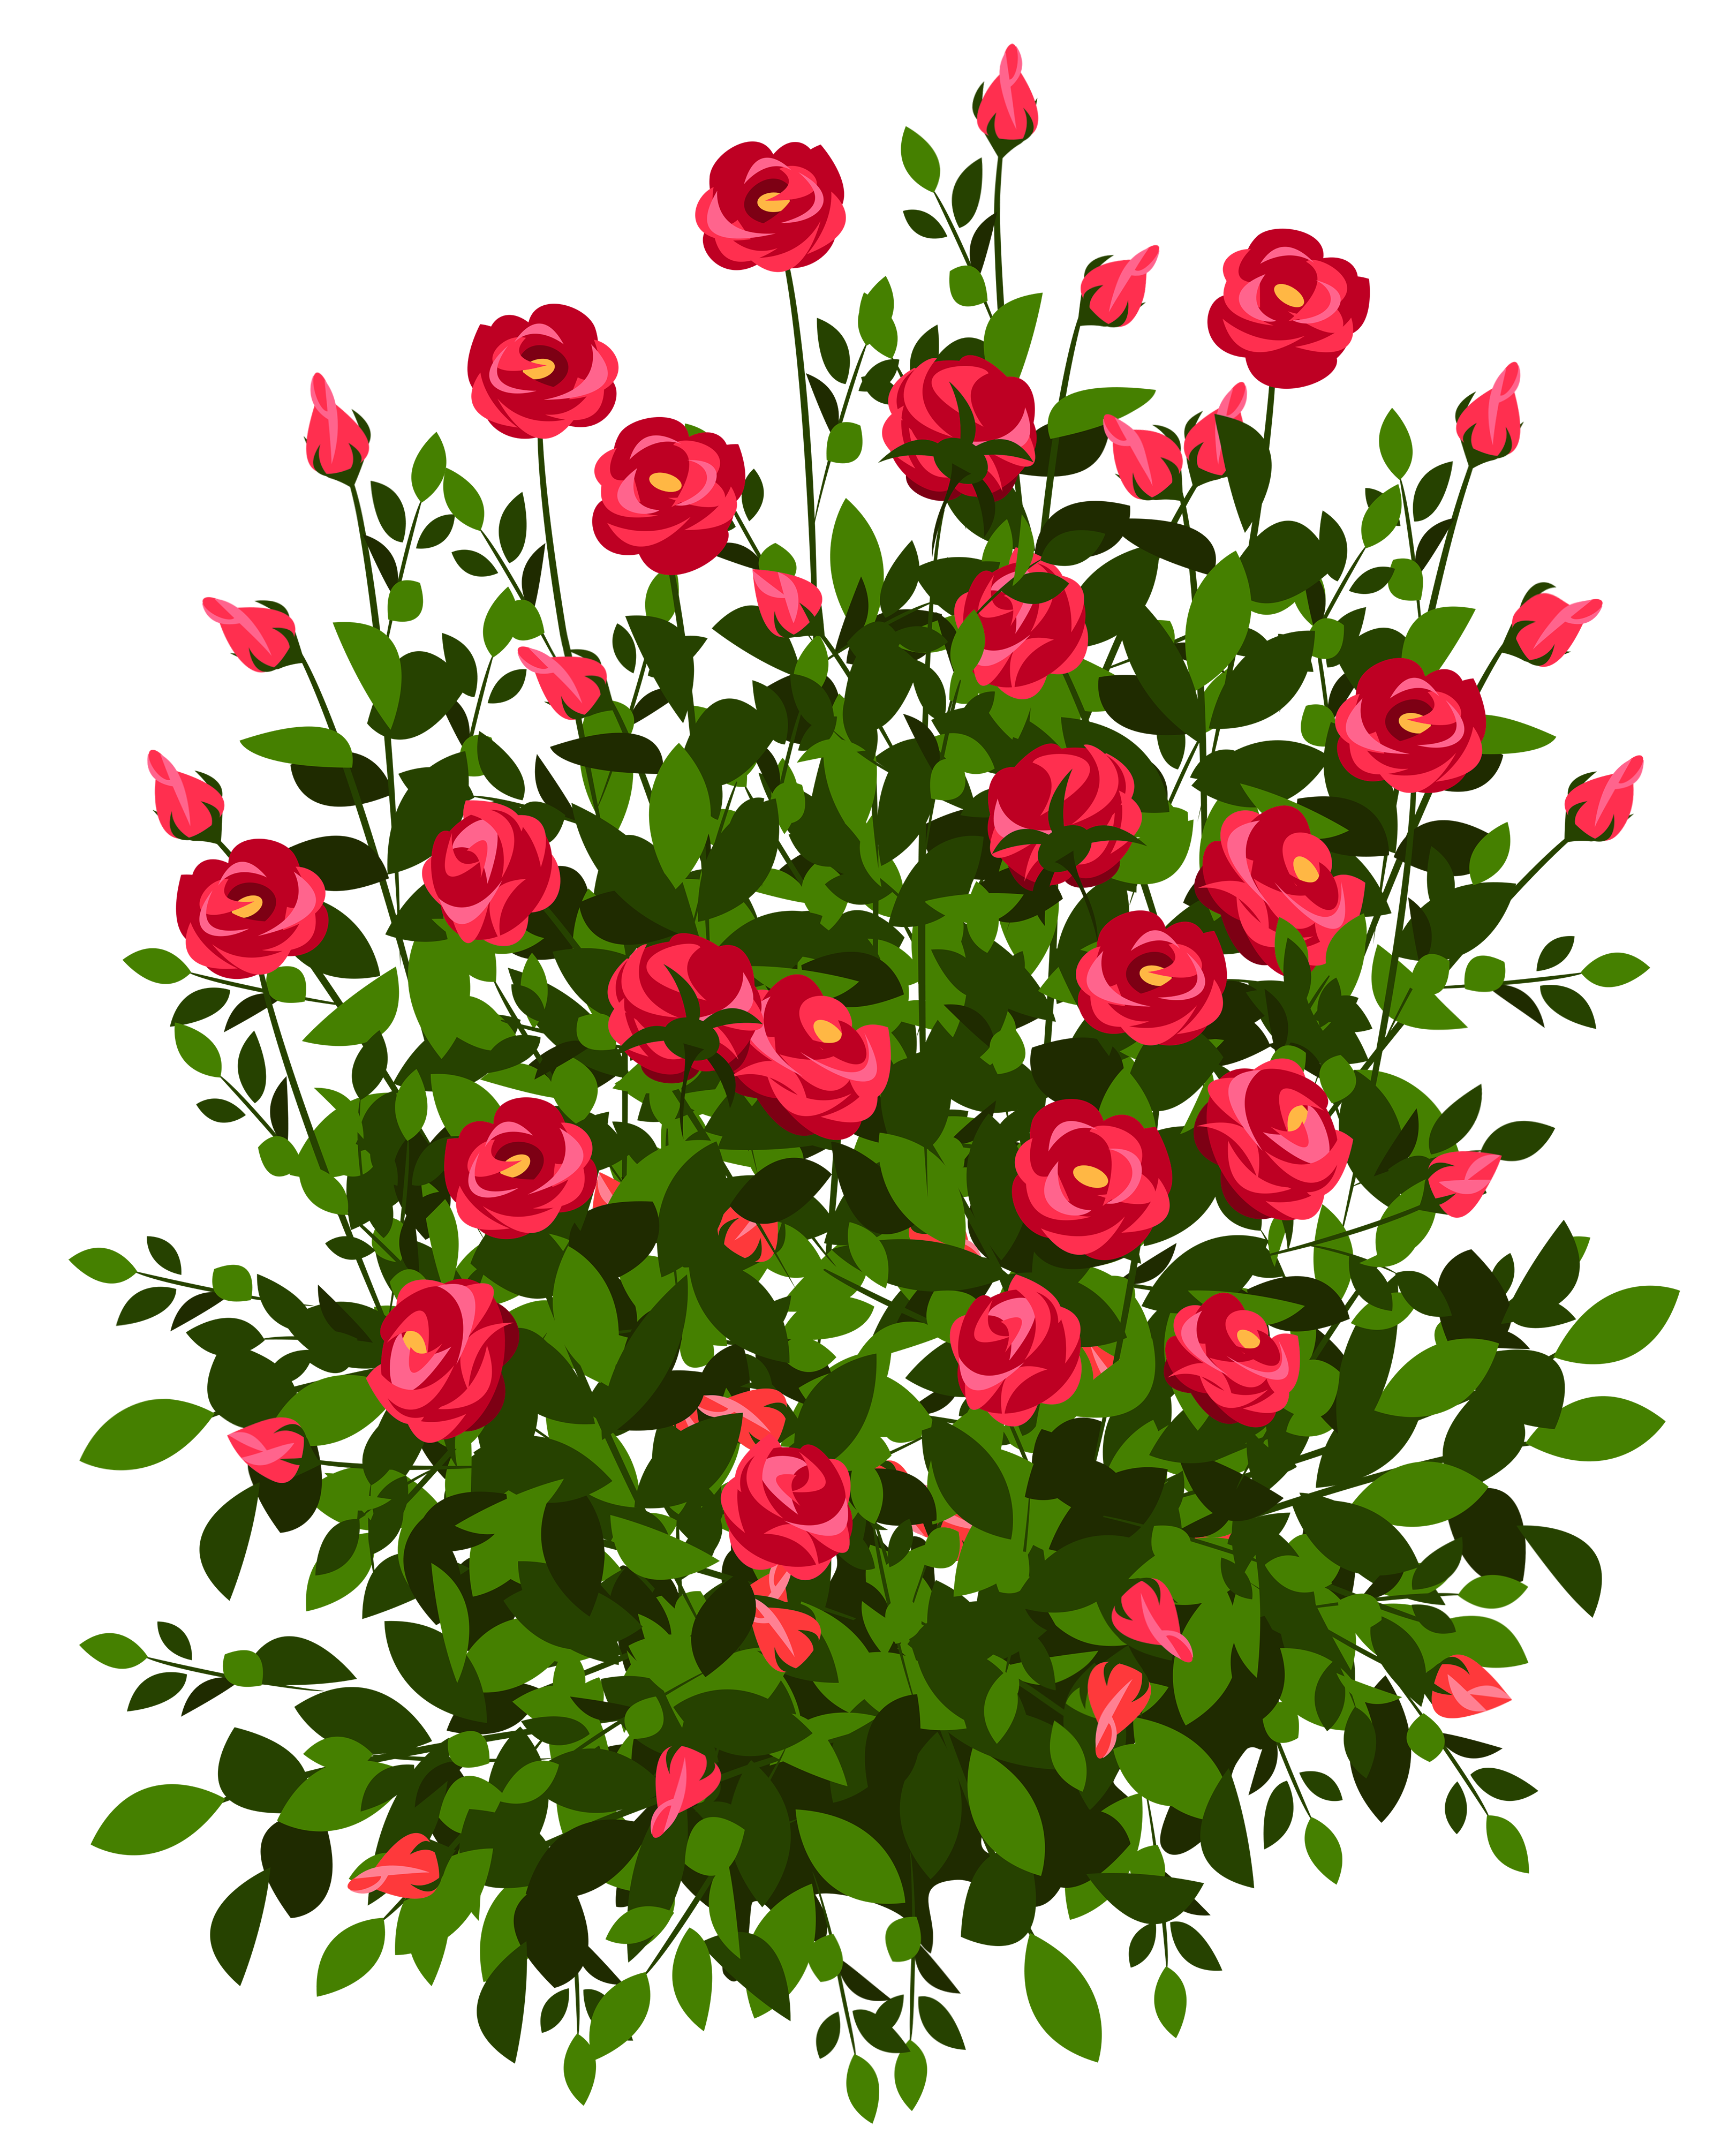 Hill clipart bush. Red rose png picture